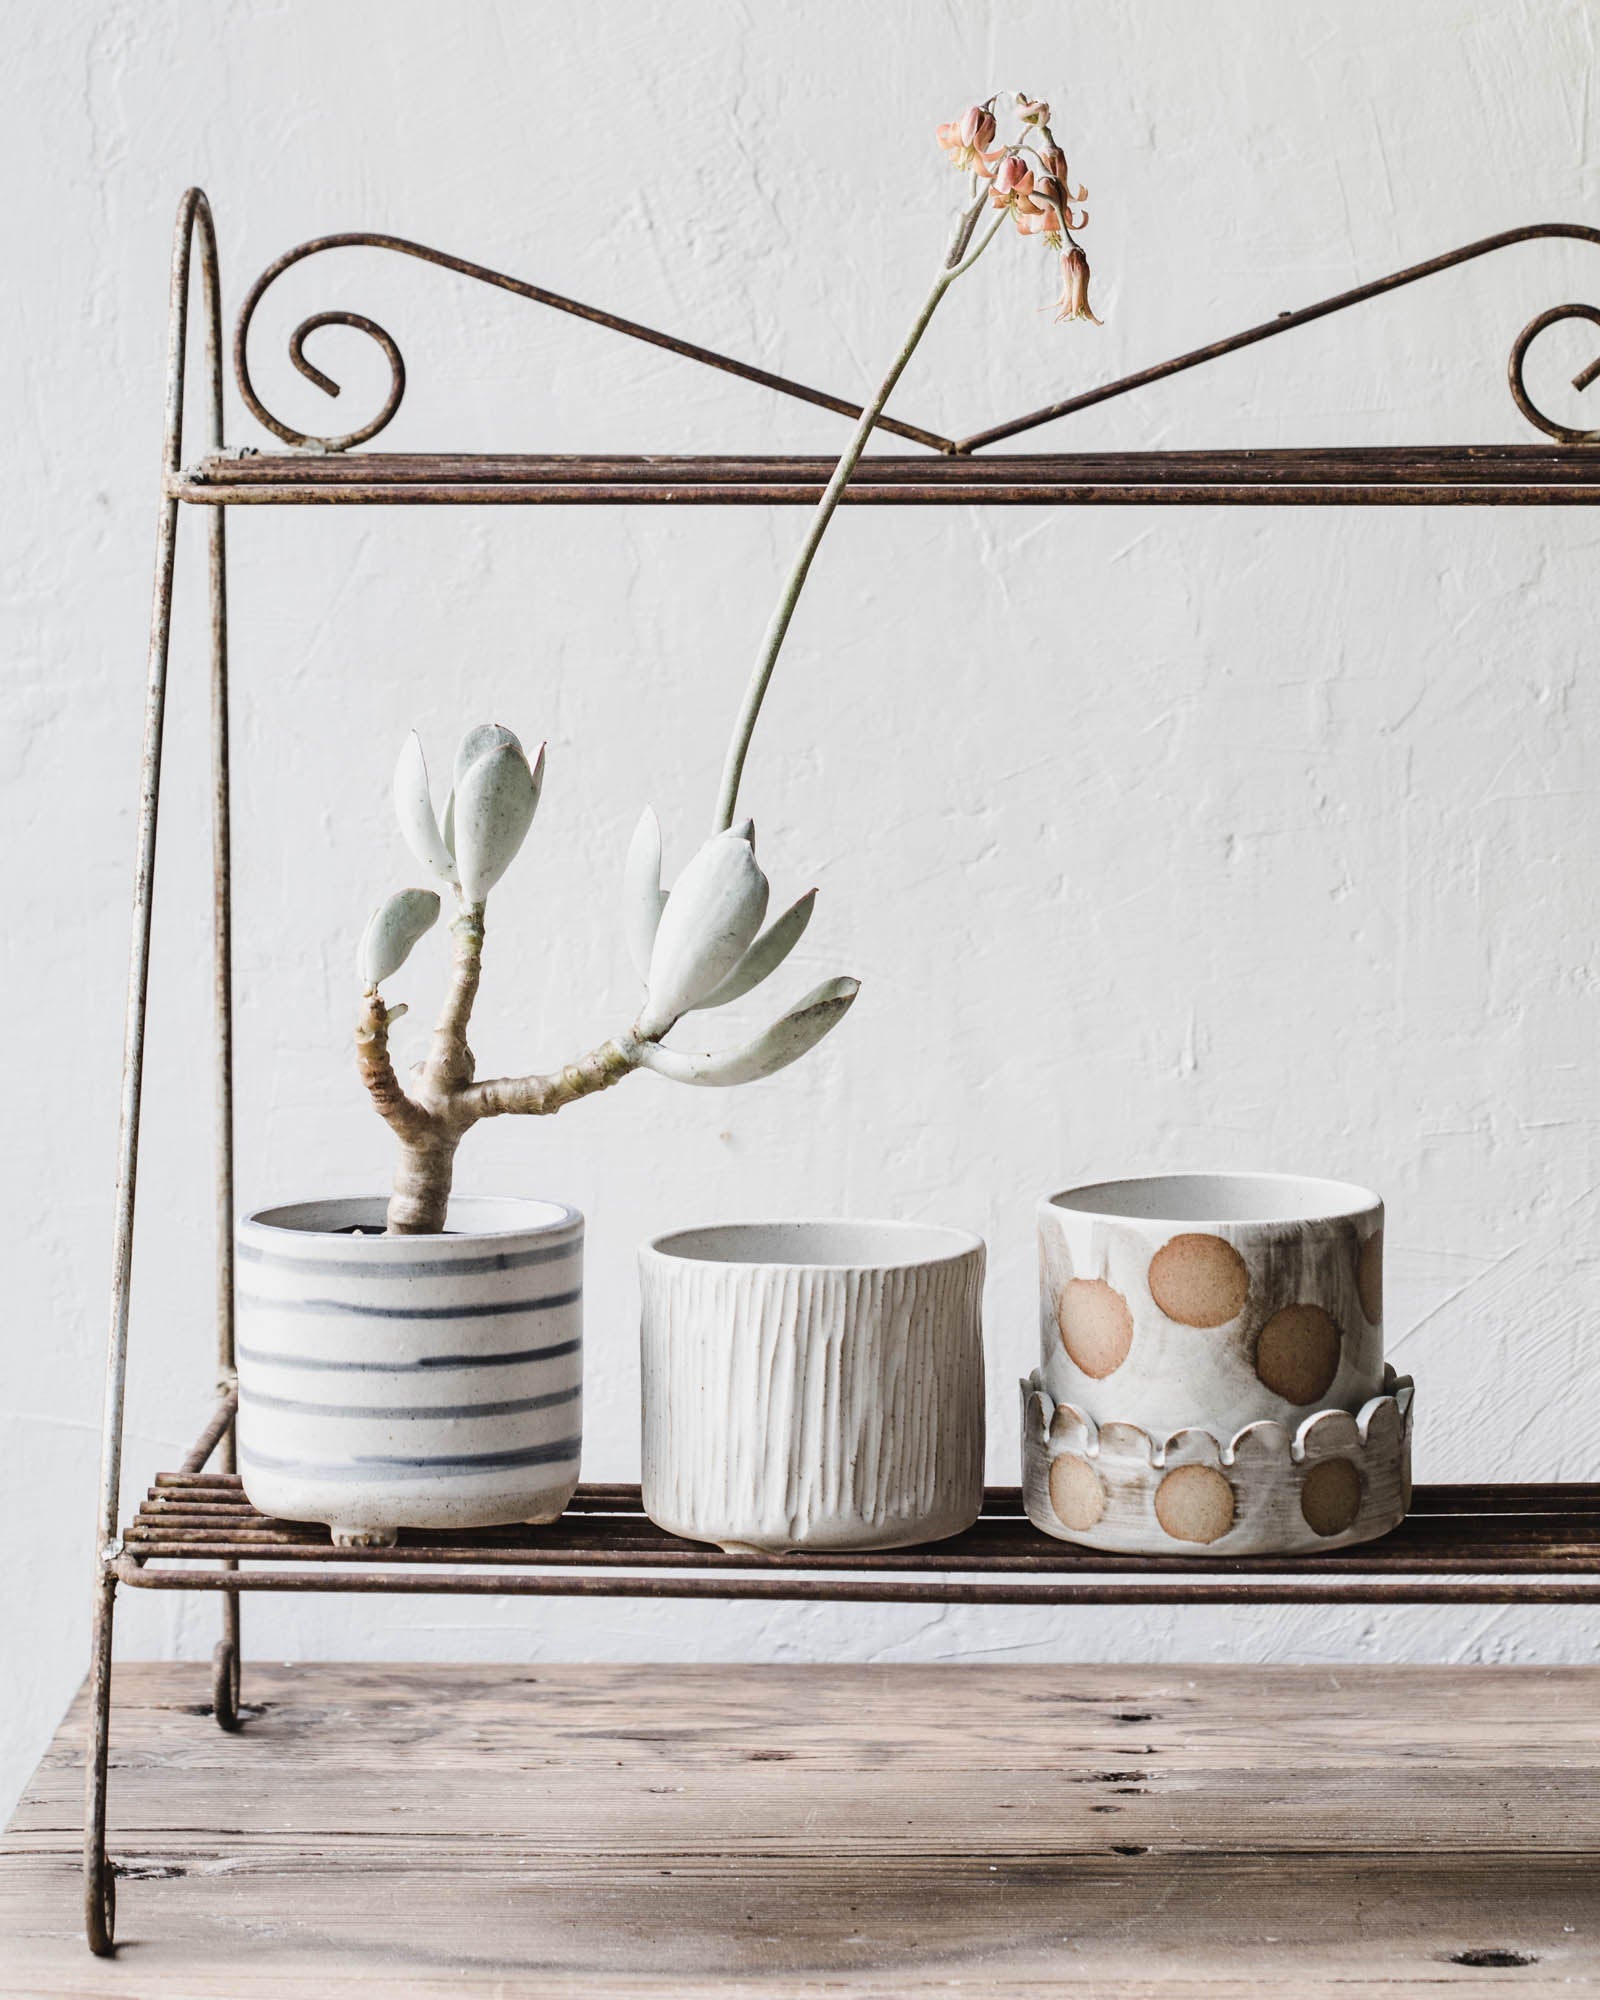 little handmade ceramic planters by clay beehive ceramics